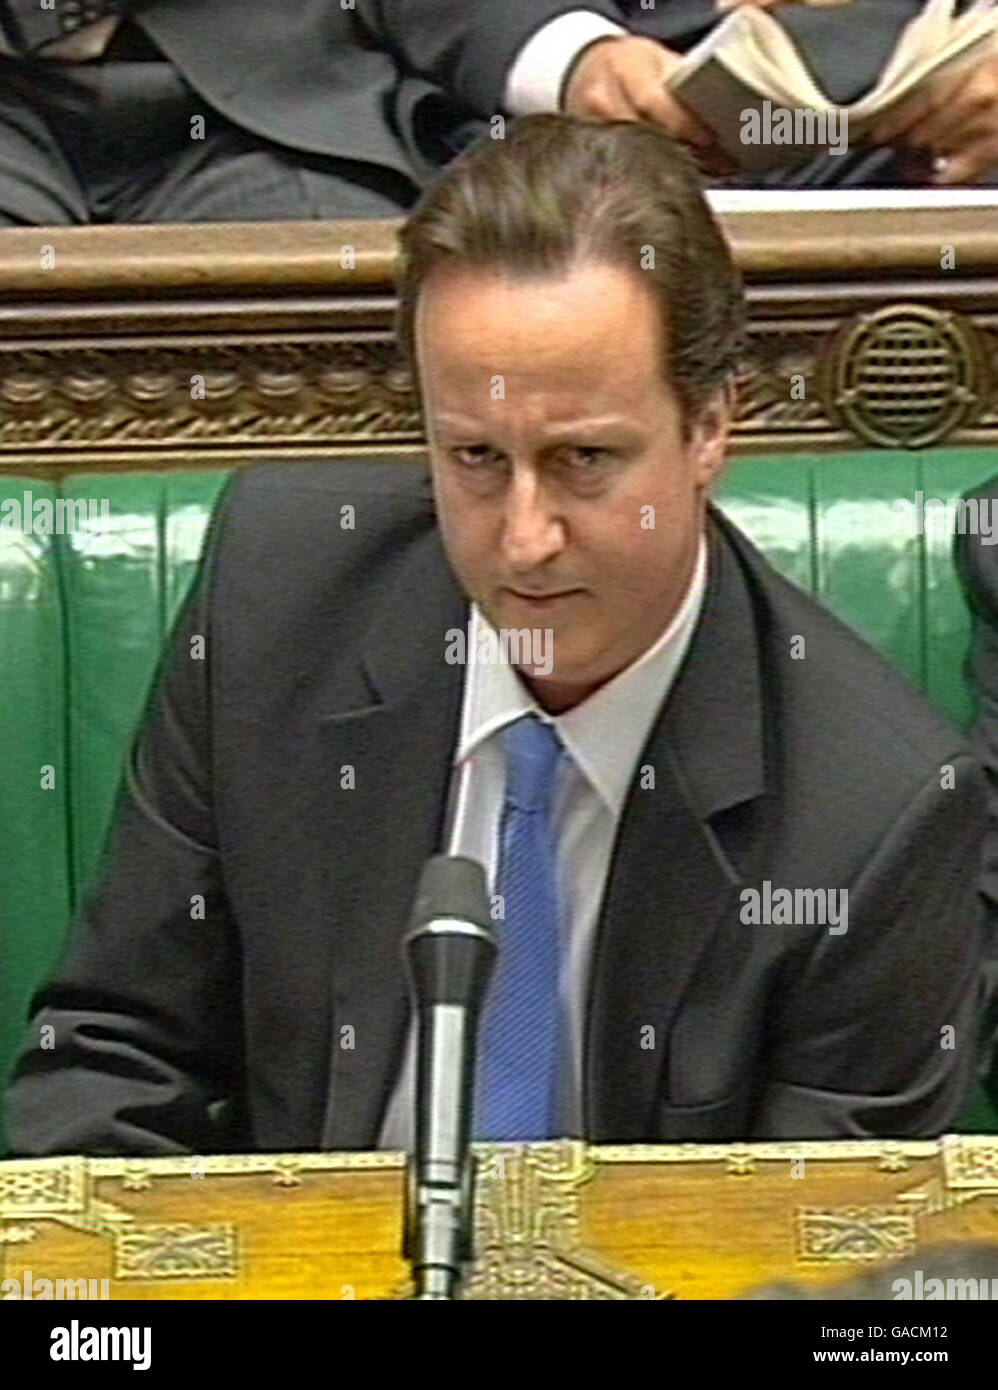 Leader of the Opposition David Cameron during Prime Minister's Questions in the House of Commons, London. Stock Photo